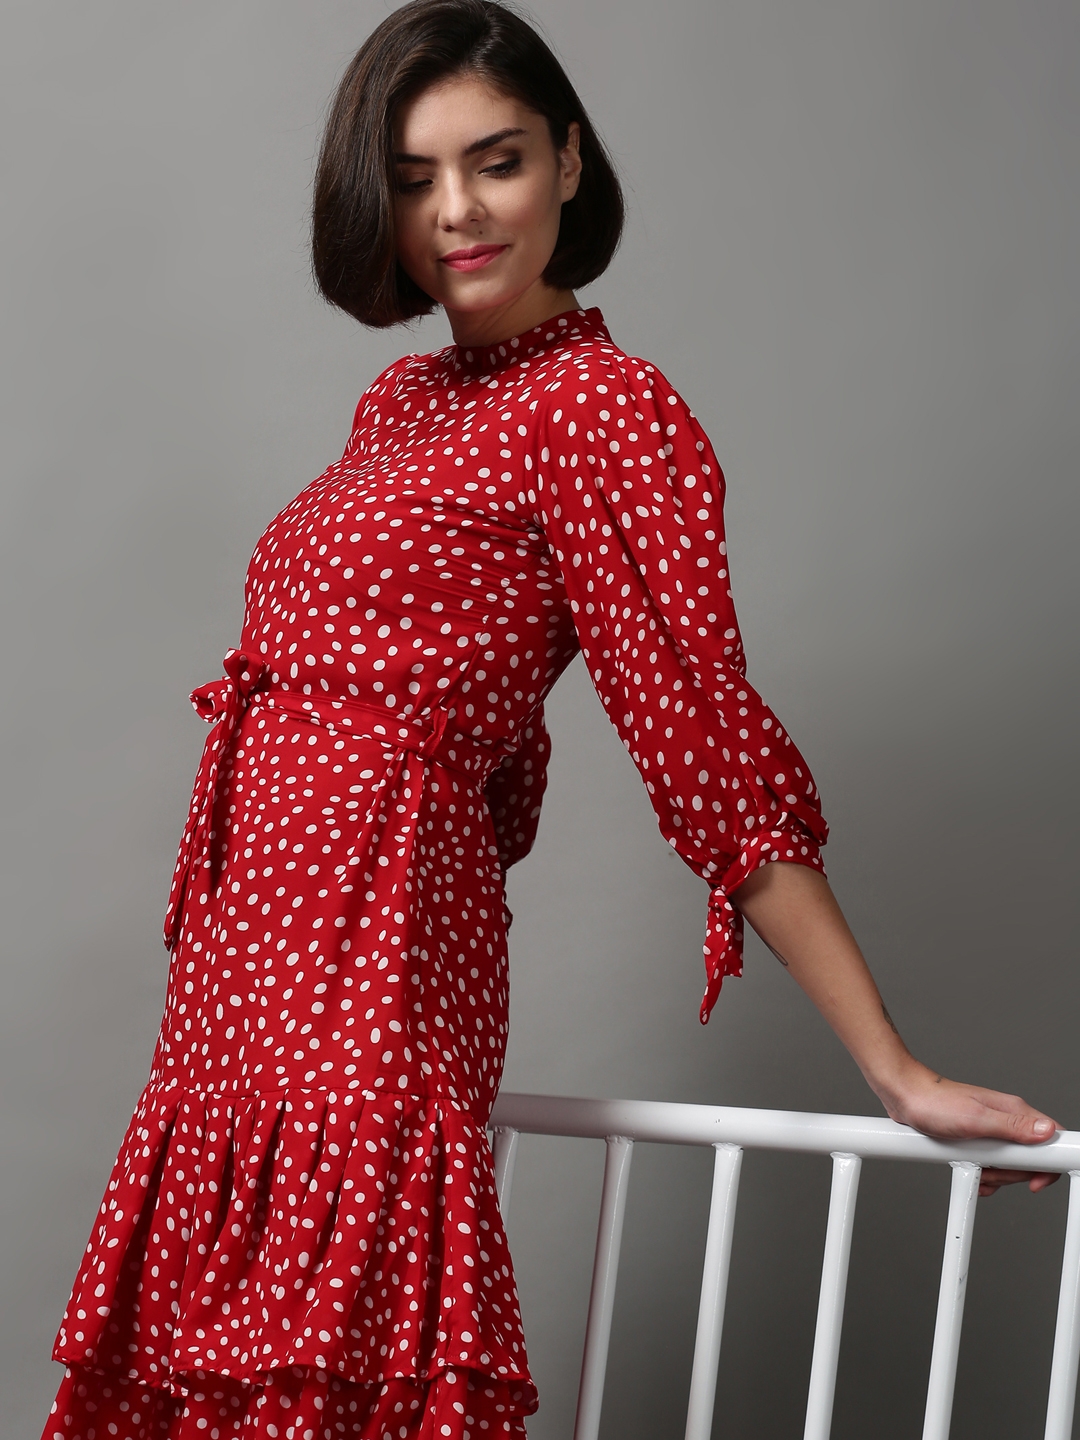 Women's Red Polyester Printed Dresses